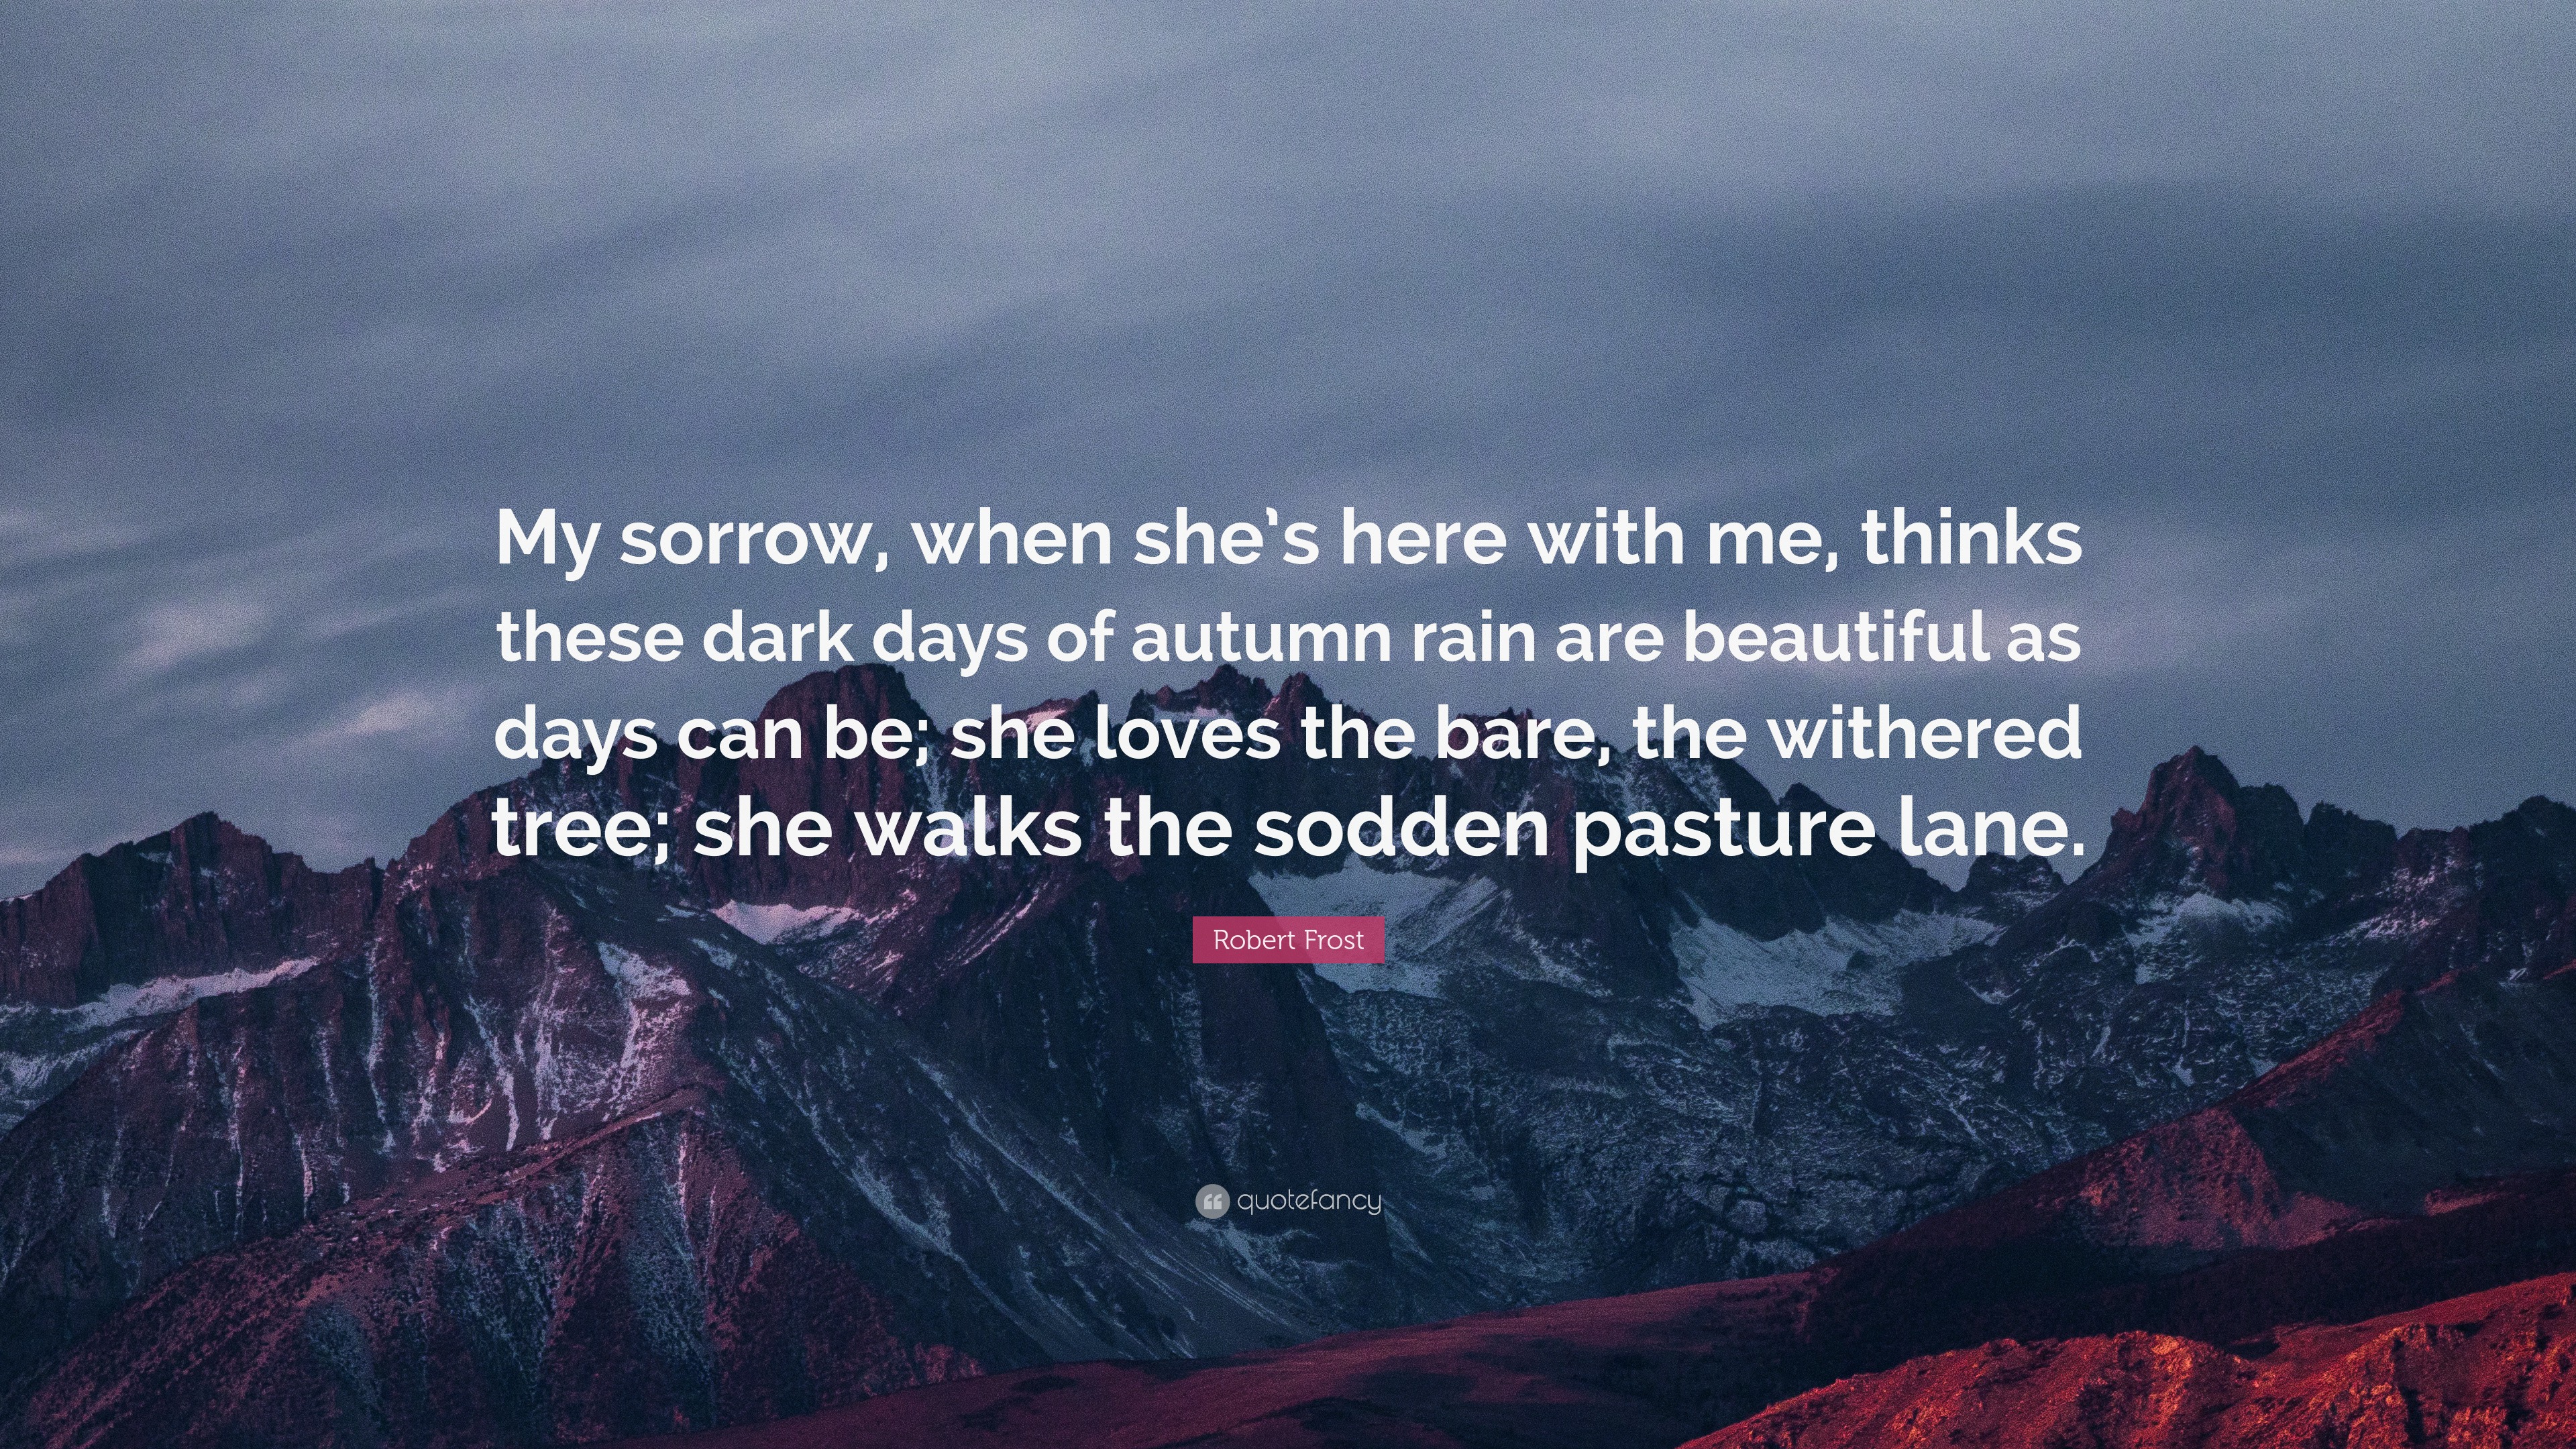 Robert Frost Quote: “My sorrow, when she’s here with me, thinks these ...